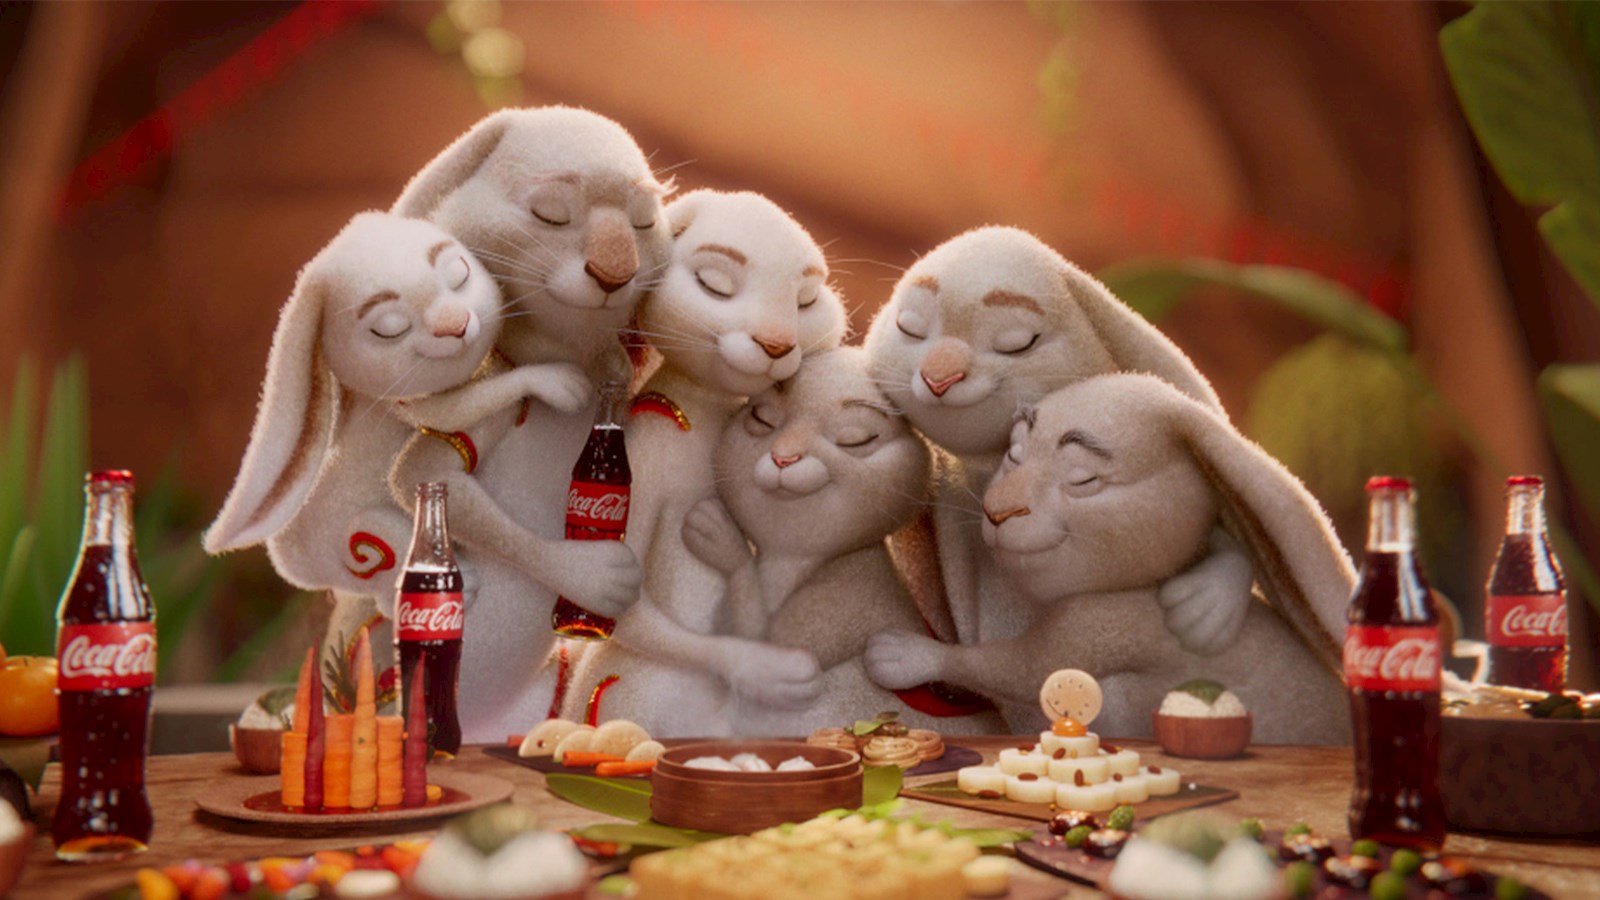 Online Create Chinese New Year of the Rabbit GIF Wishes with Name